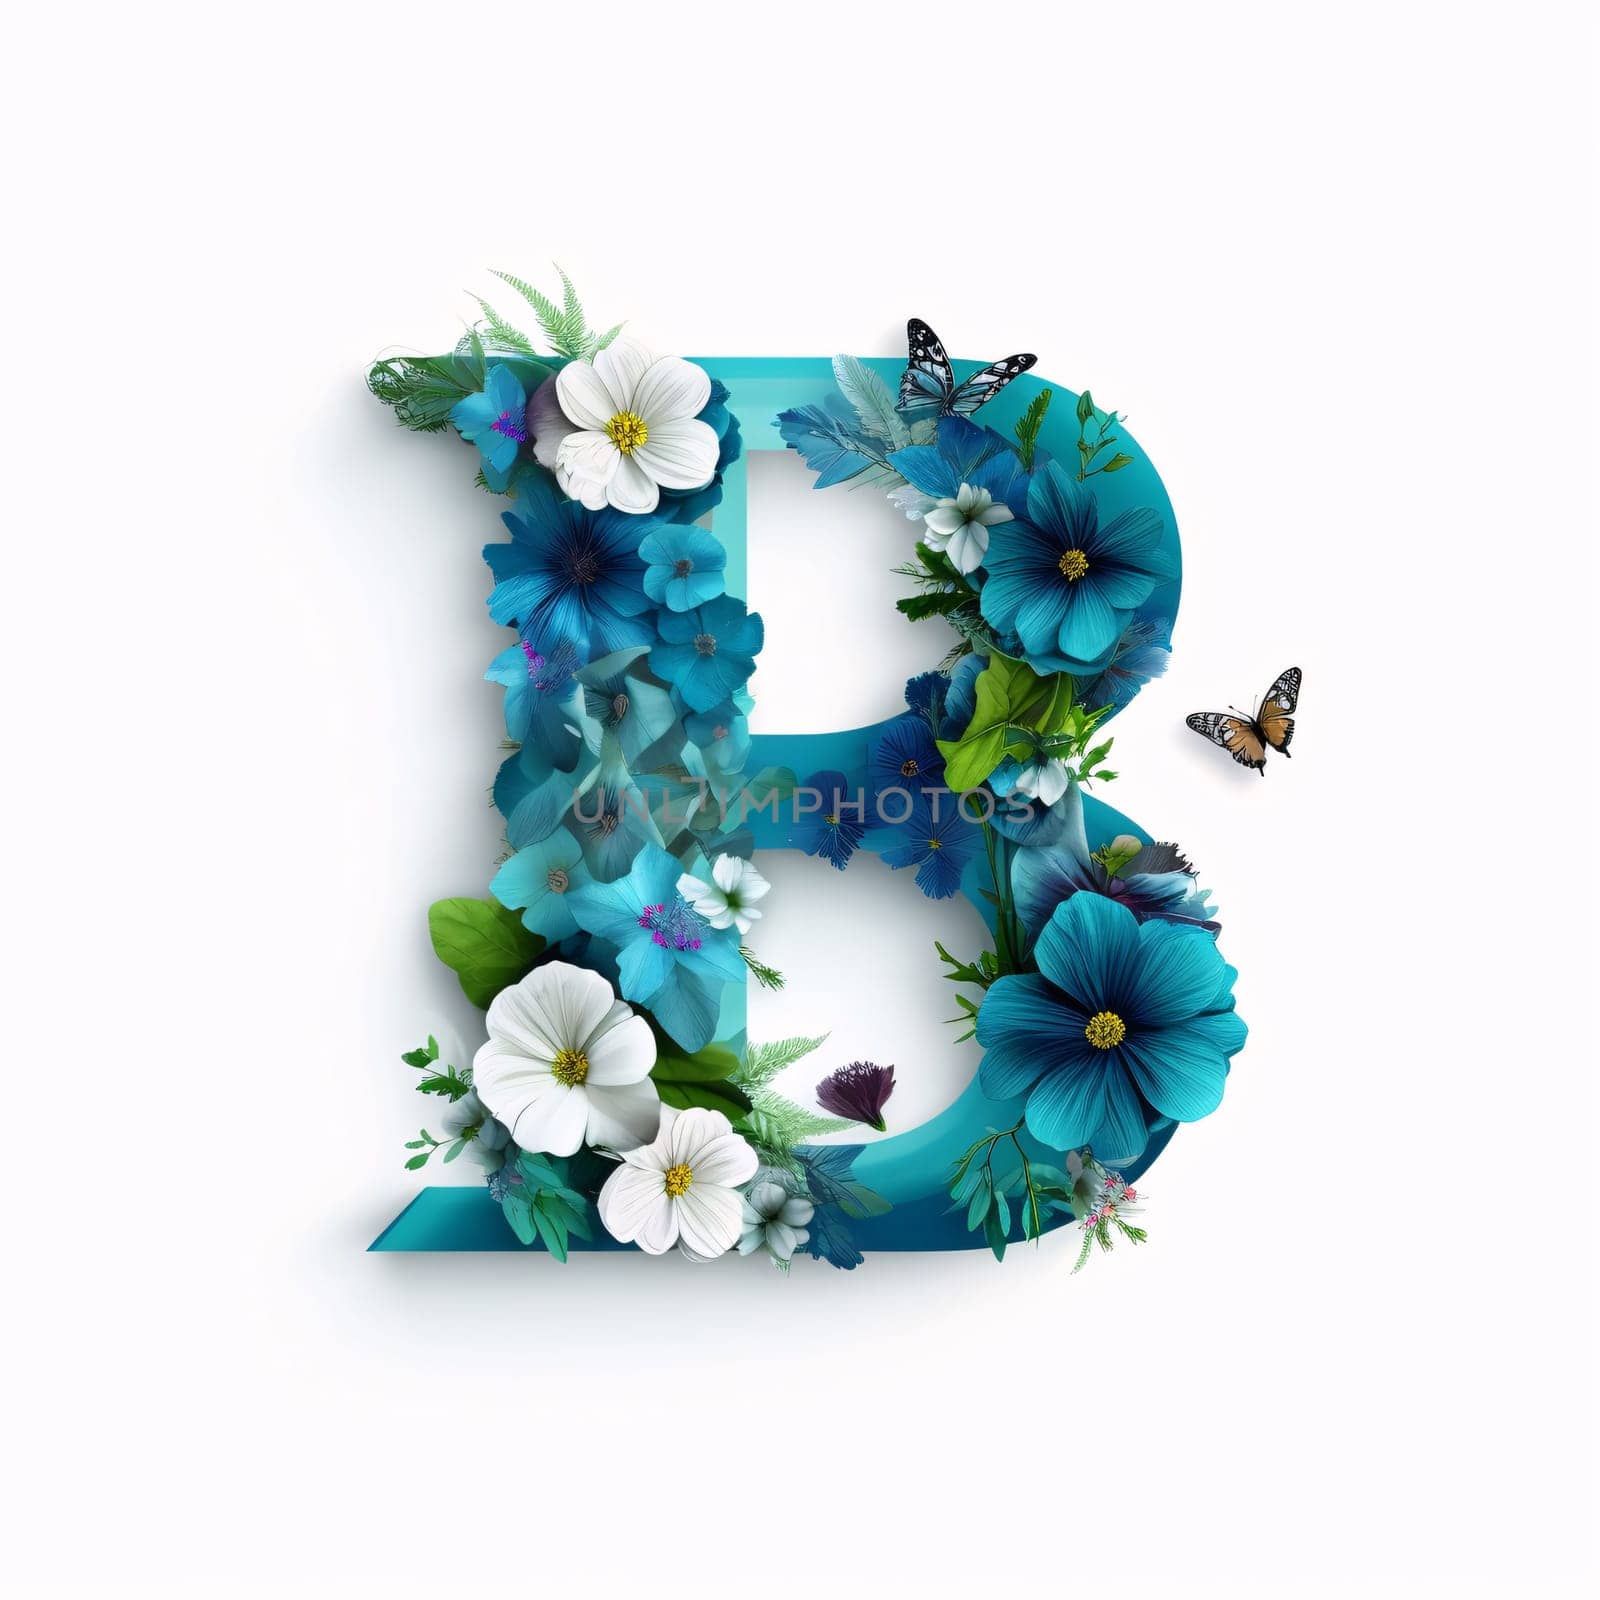 Graphic alphabet letters: Alphabet letter B made of blue flowers and butterflies isolated on white background